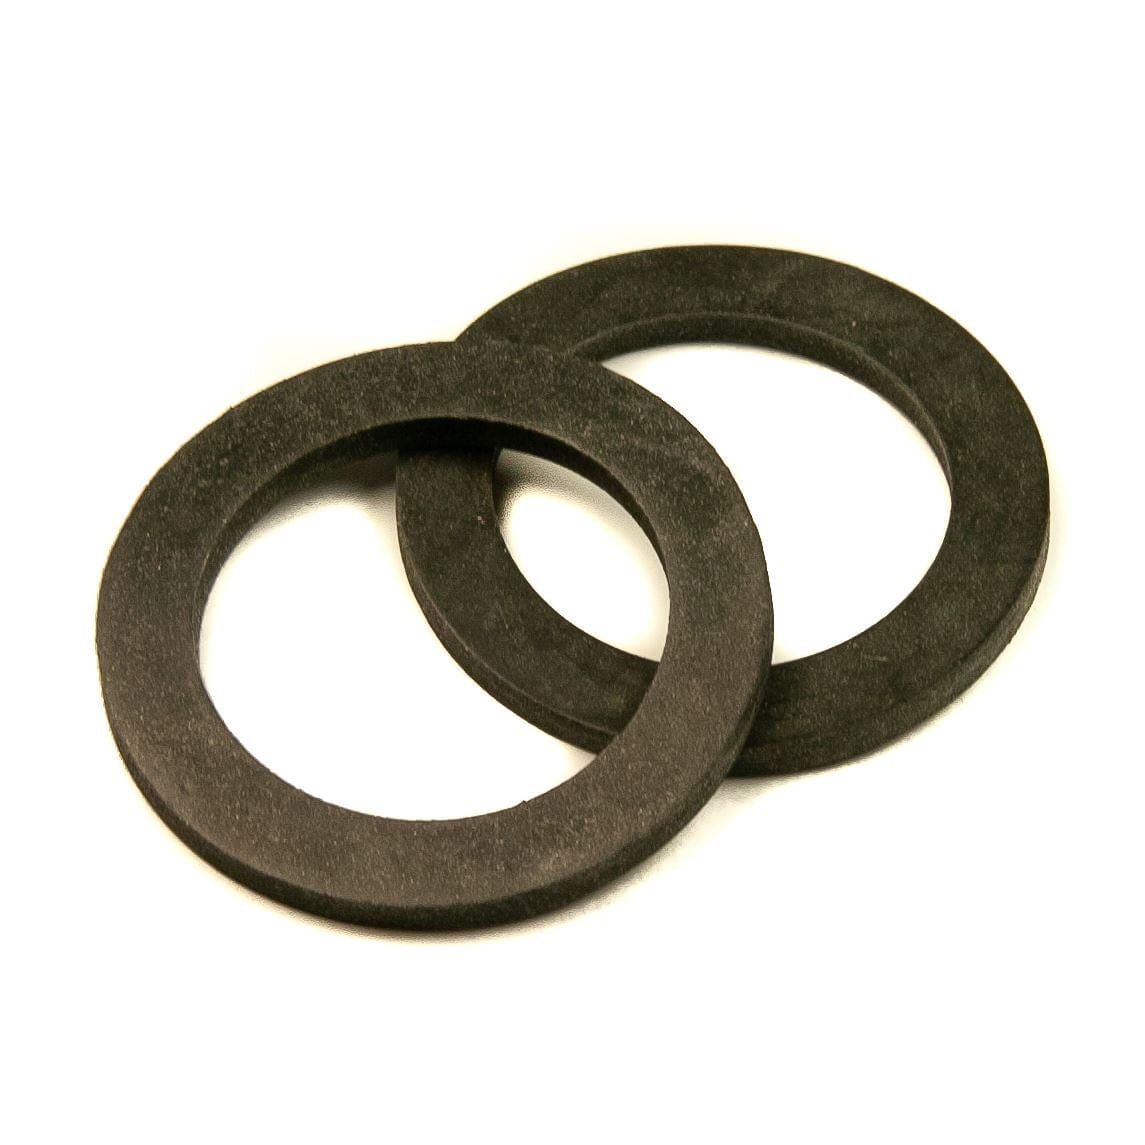 Central Heating Pump Valve Washer Rubber 45mm Diameter (Pack of 2) - Thunderfix Hardware